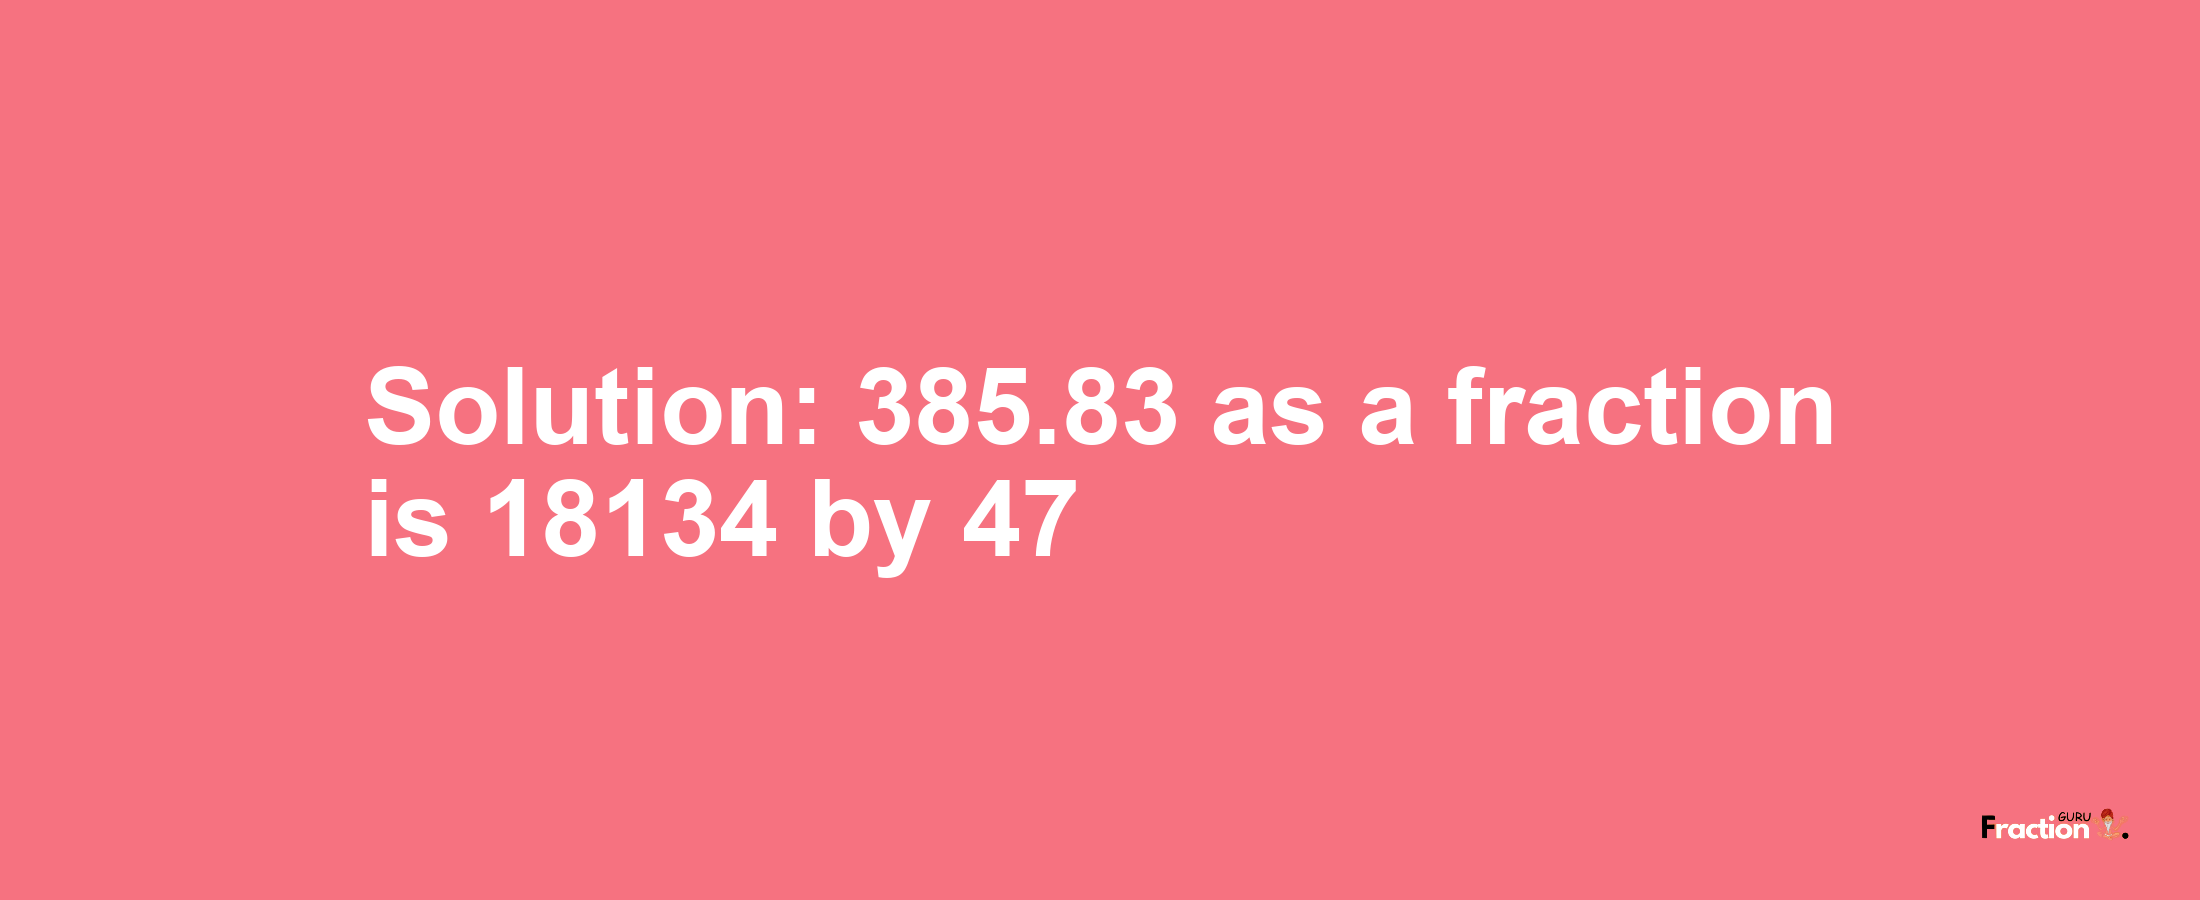 Solution:385.83 as a fraction is 18134/47